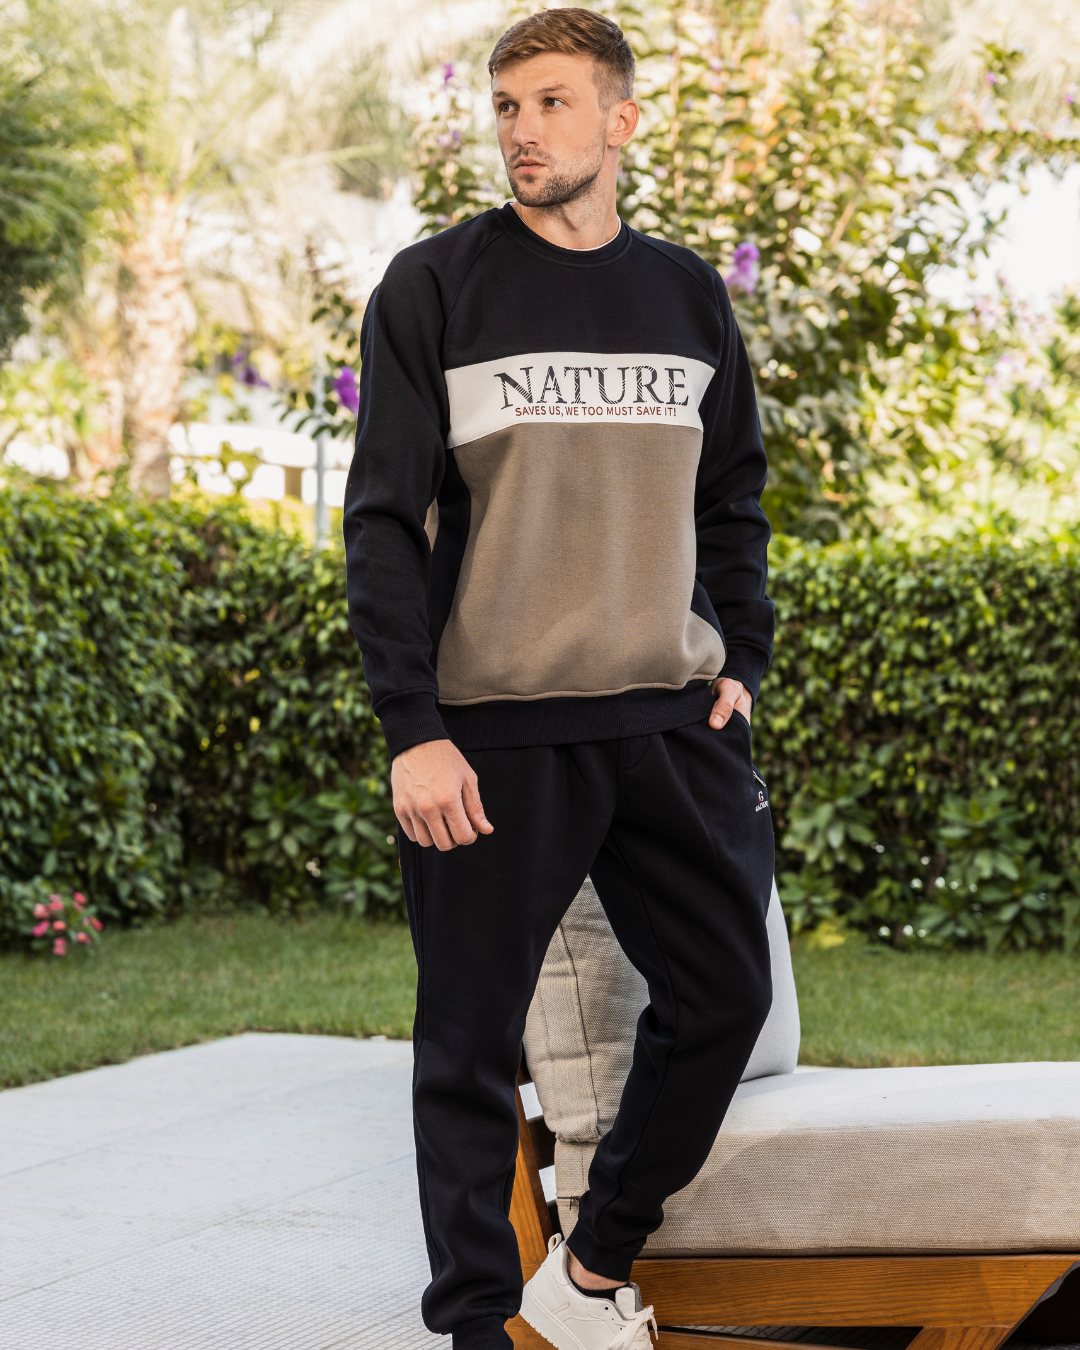 NATURE SAVES US Pajamas for men, printed on the chest